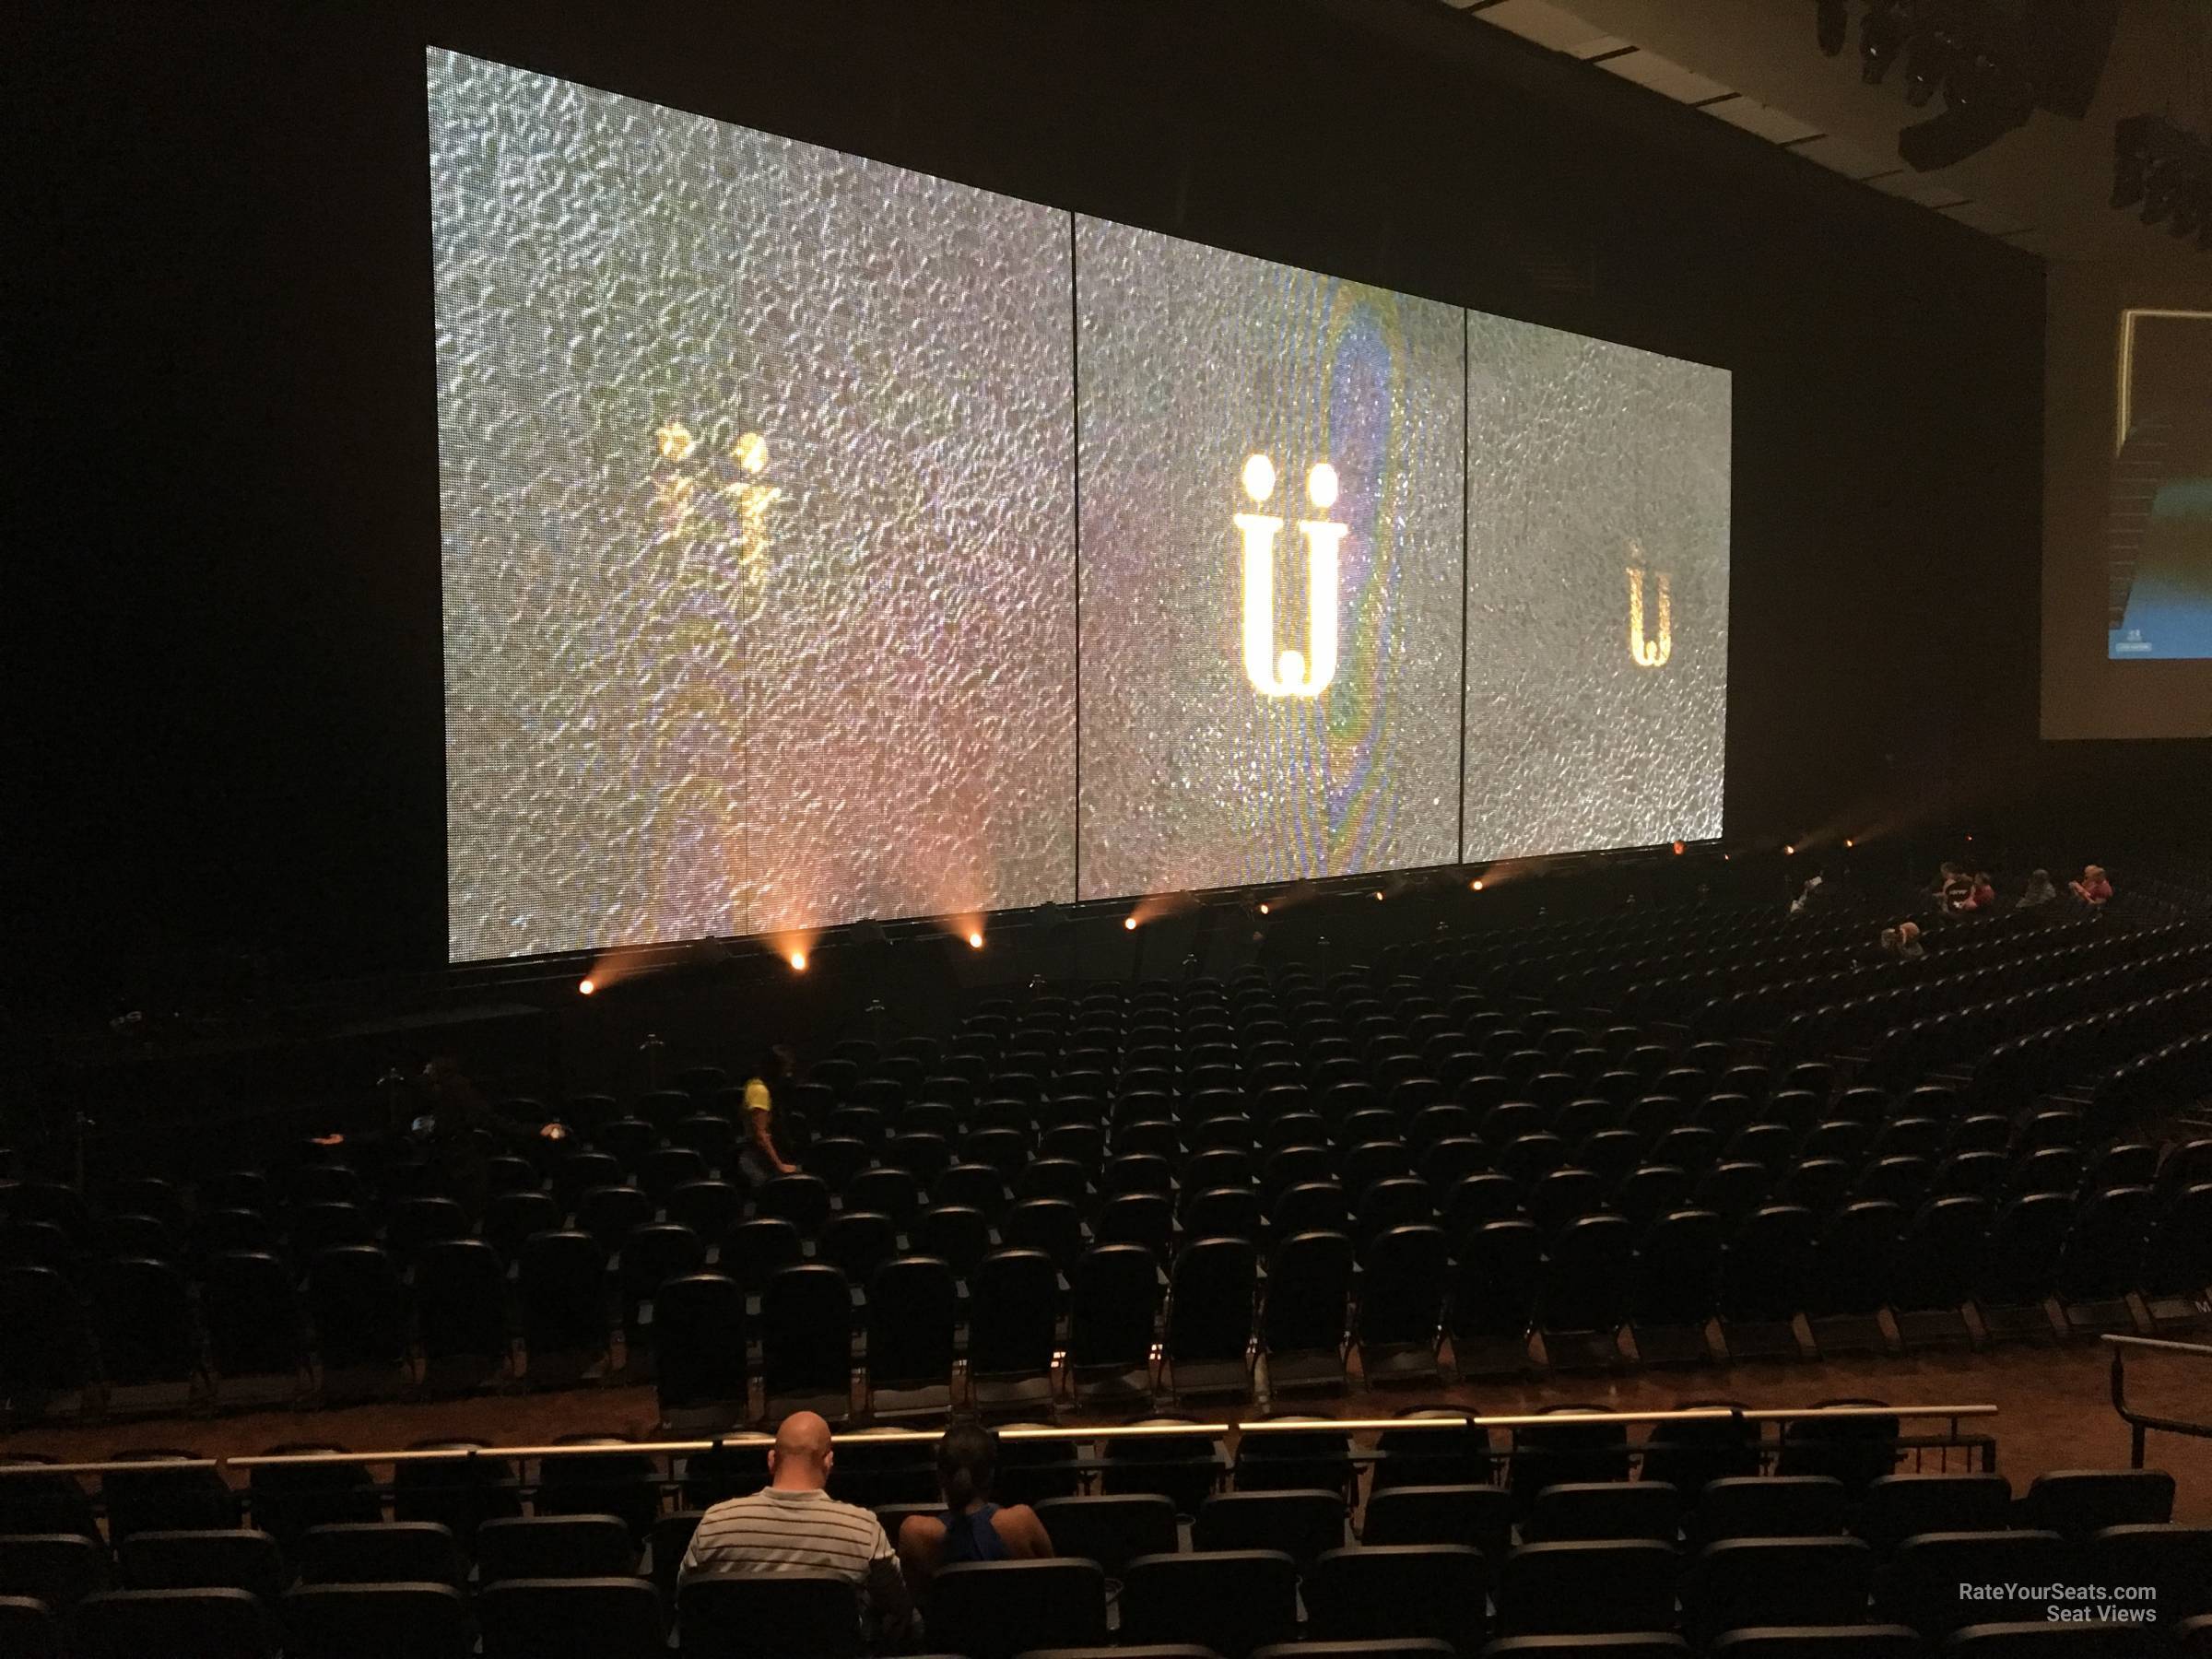 section 205, row k seat view  - dolby live at park mgm